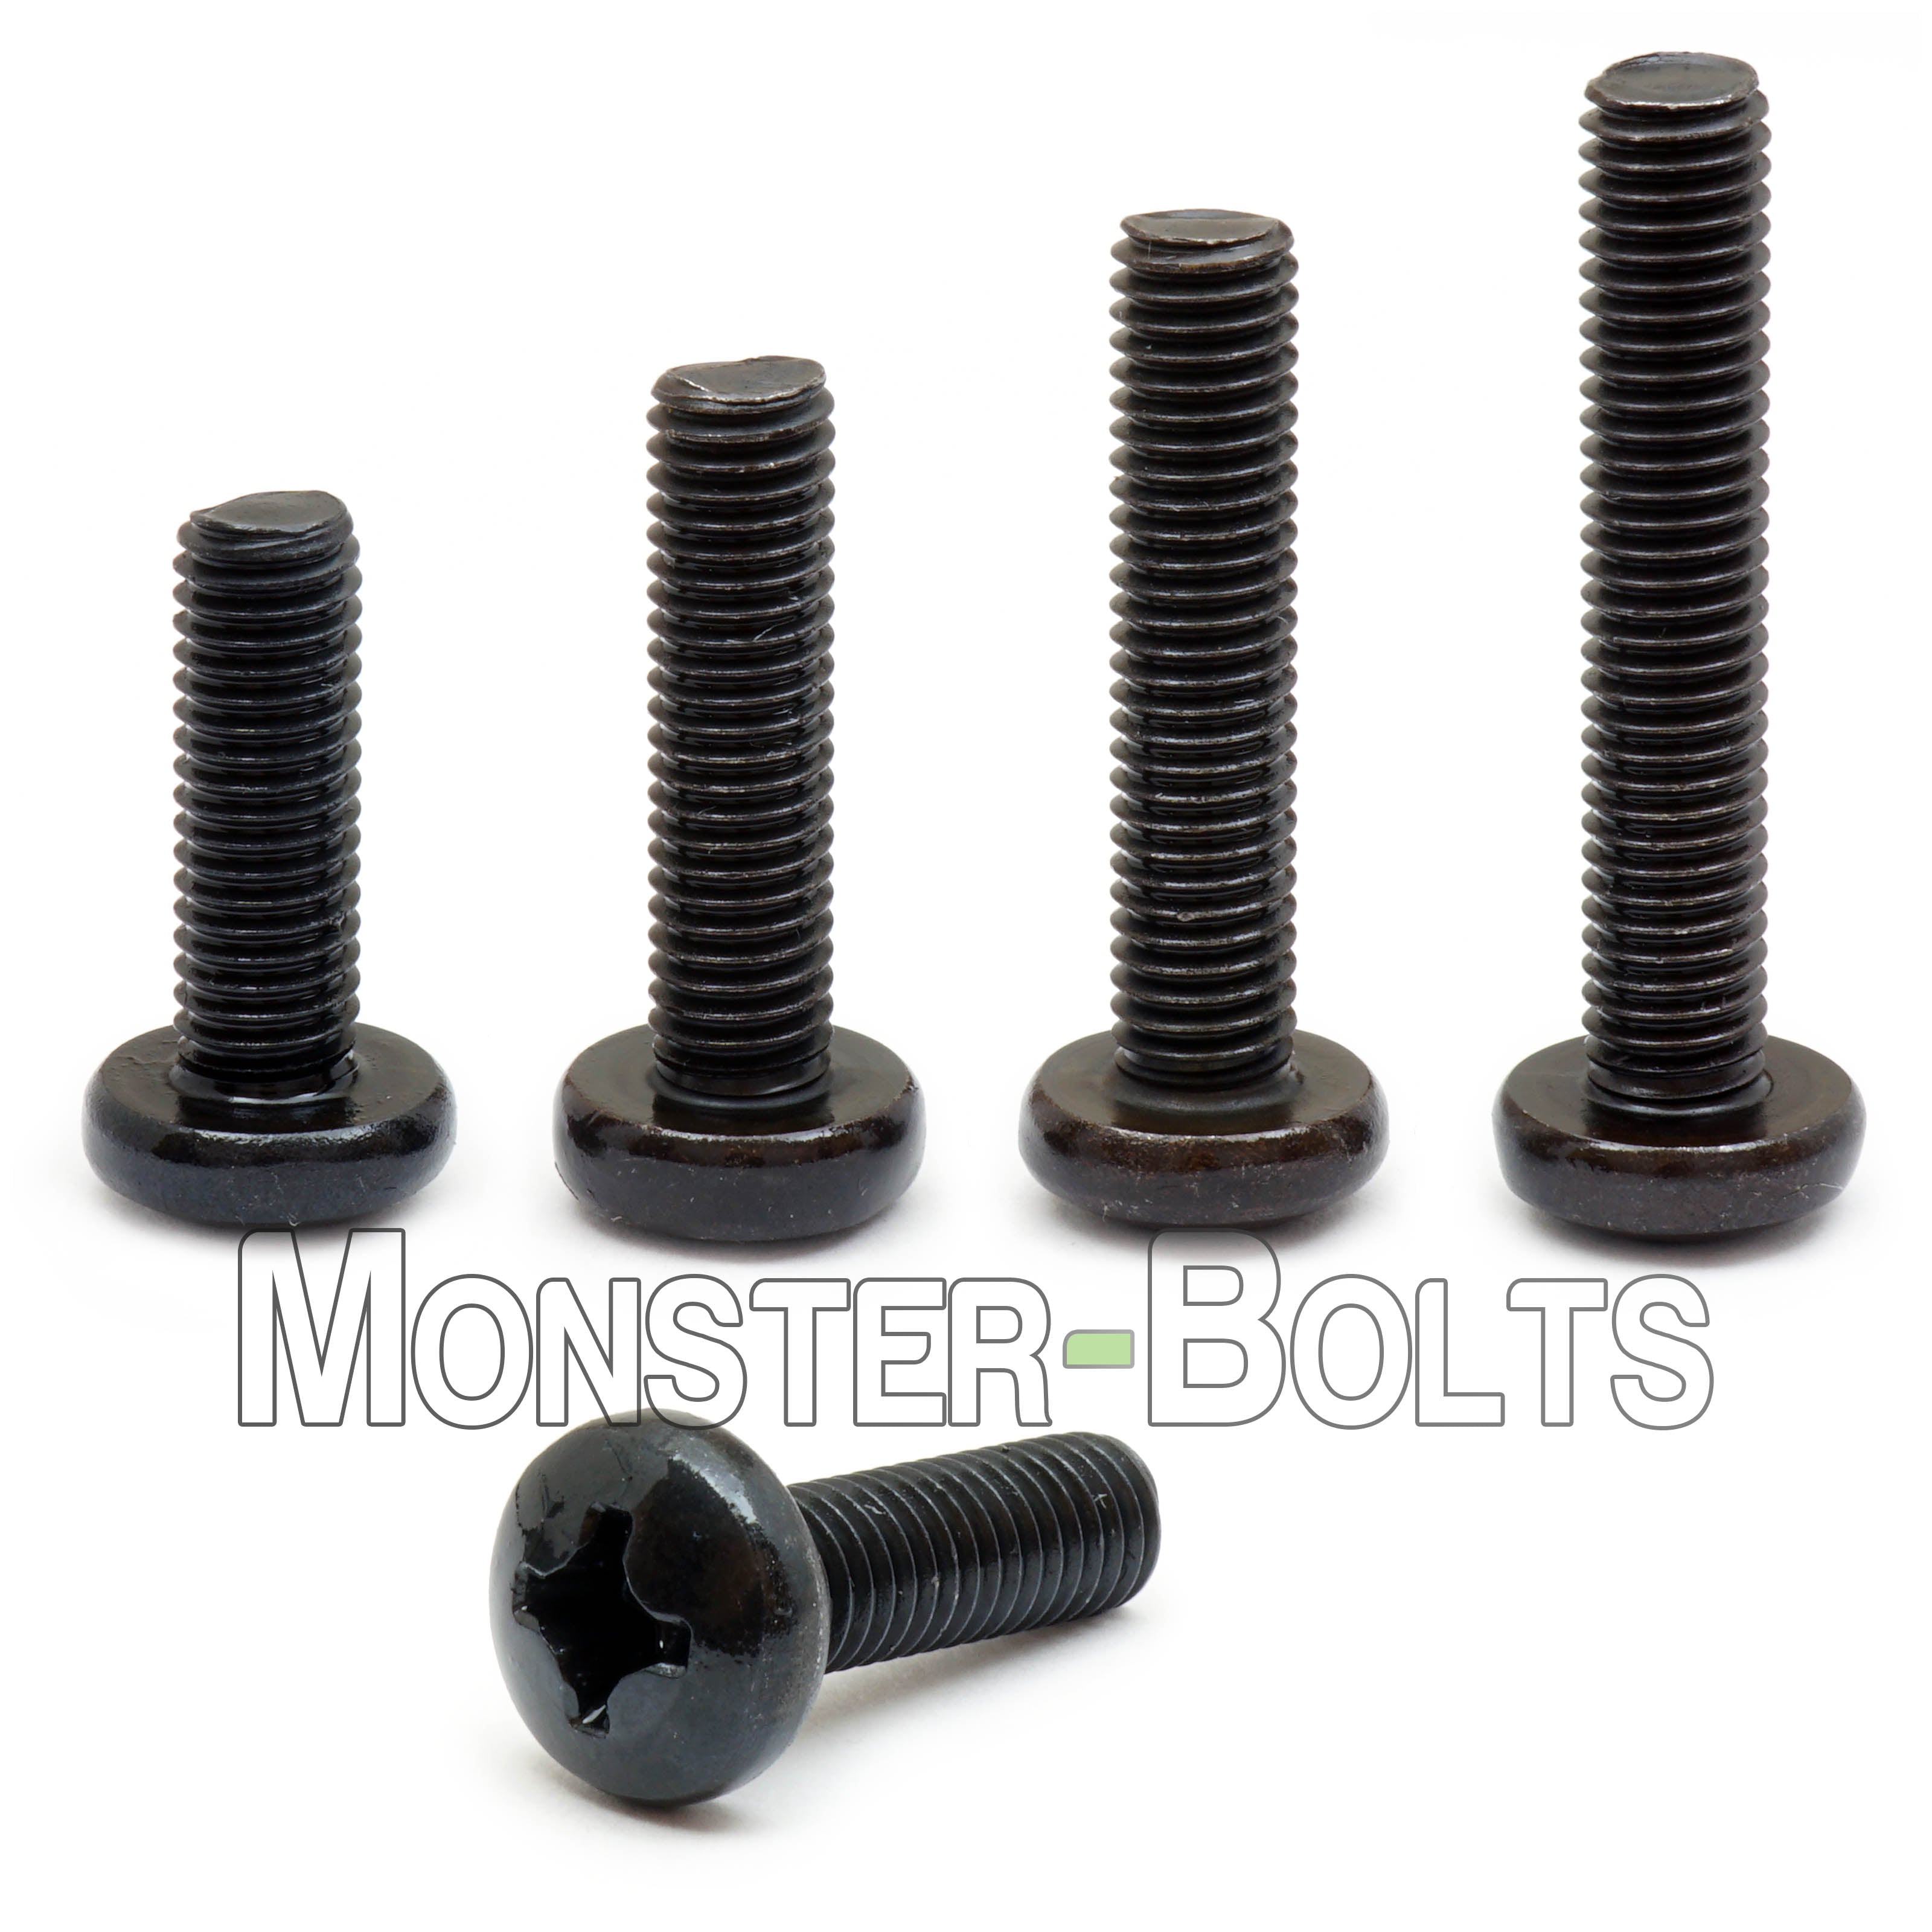 #3 Phillips Drive Fully Threaded M6-1 Thread Size Small Parts M620D7985AB Import Pack of 50 Meets DIN 7985 Black Oxide Finish 20 mm Length Steel Pan Head Machine Screw 